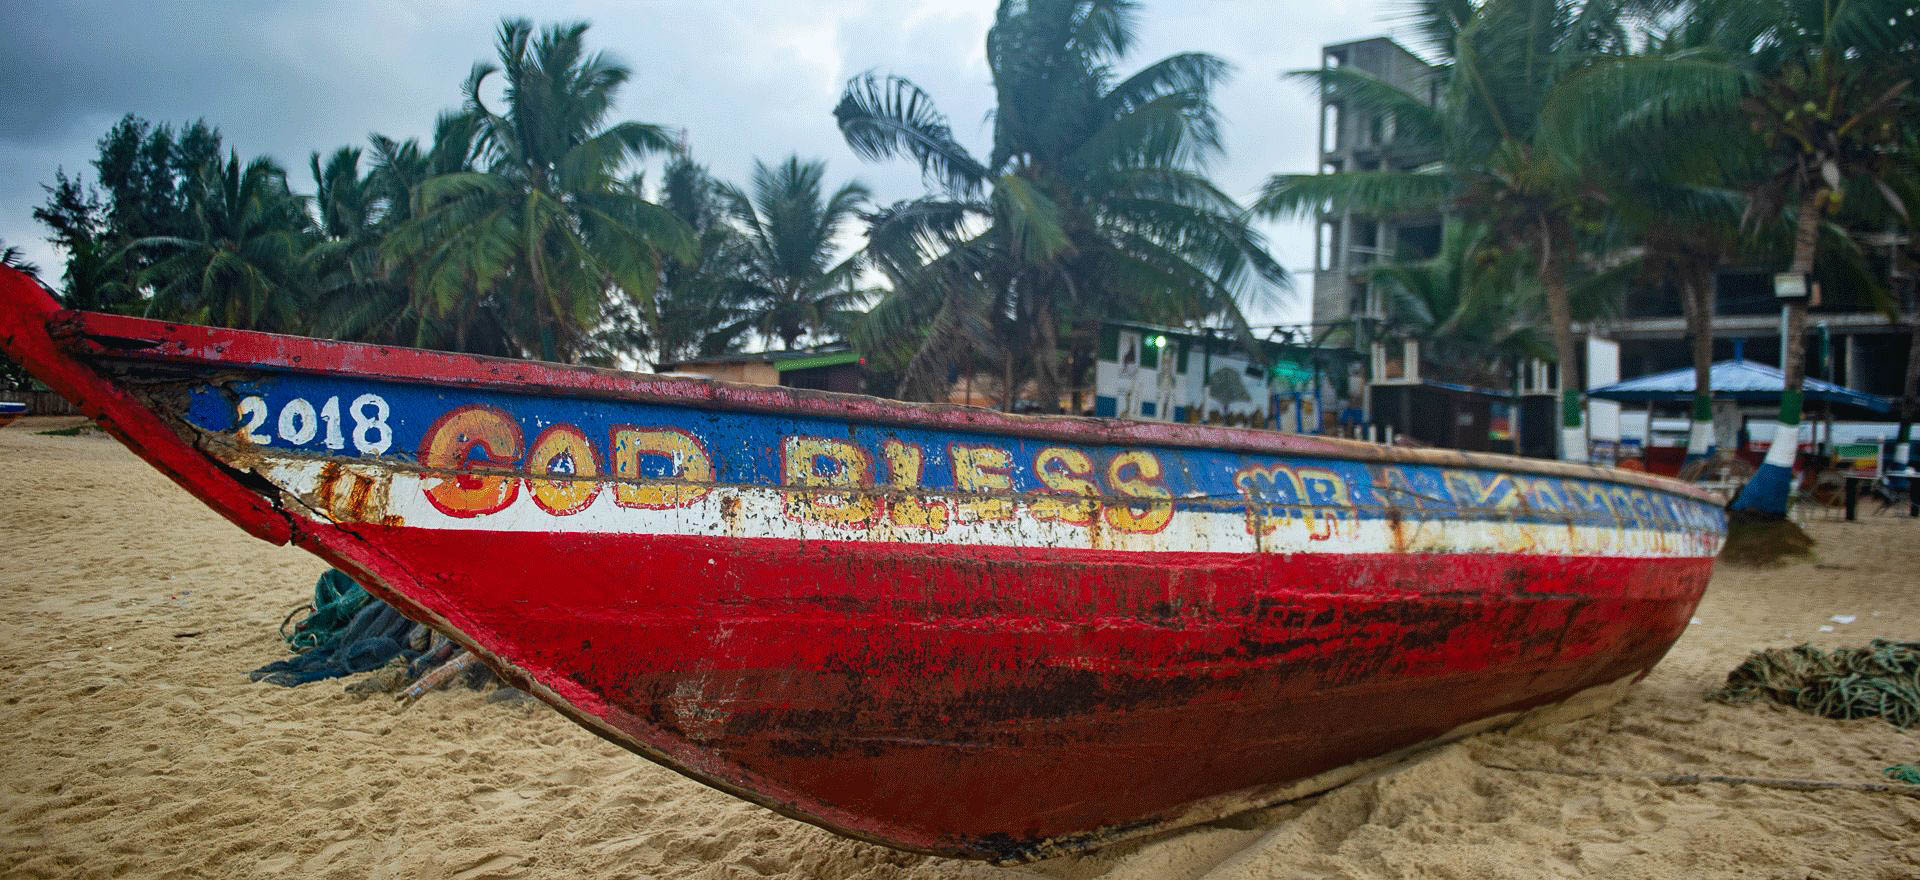 Sierra Leone Holidays and Tours - Decorated fishing boat on beach